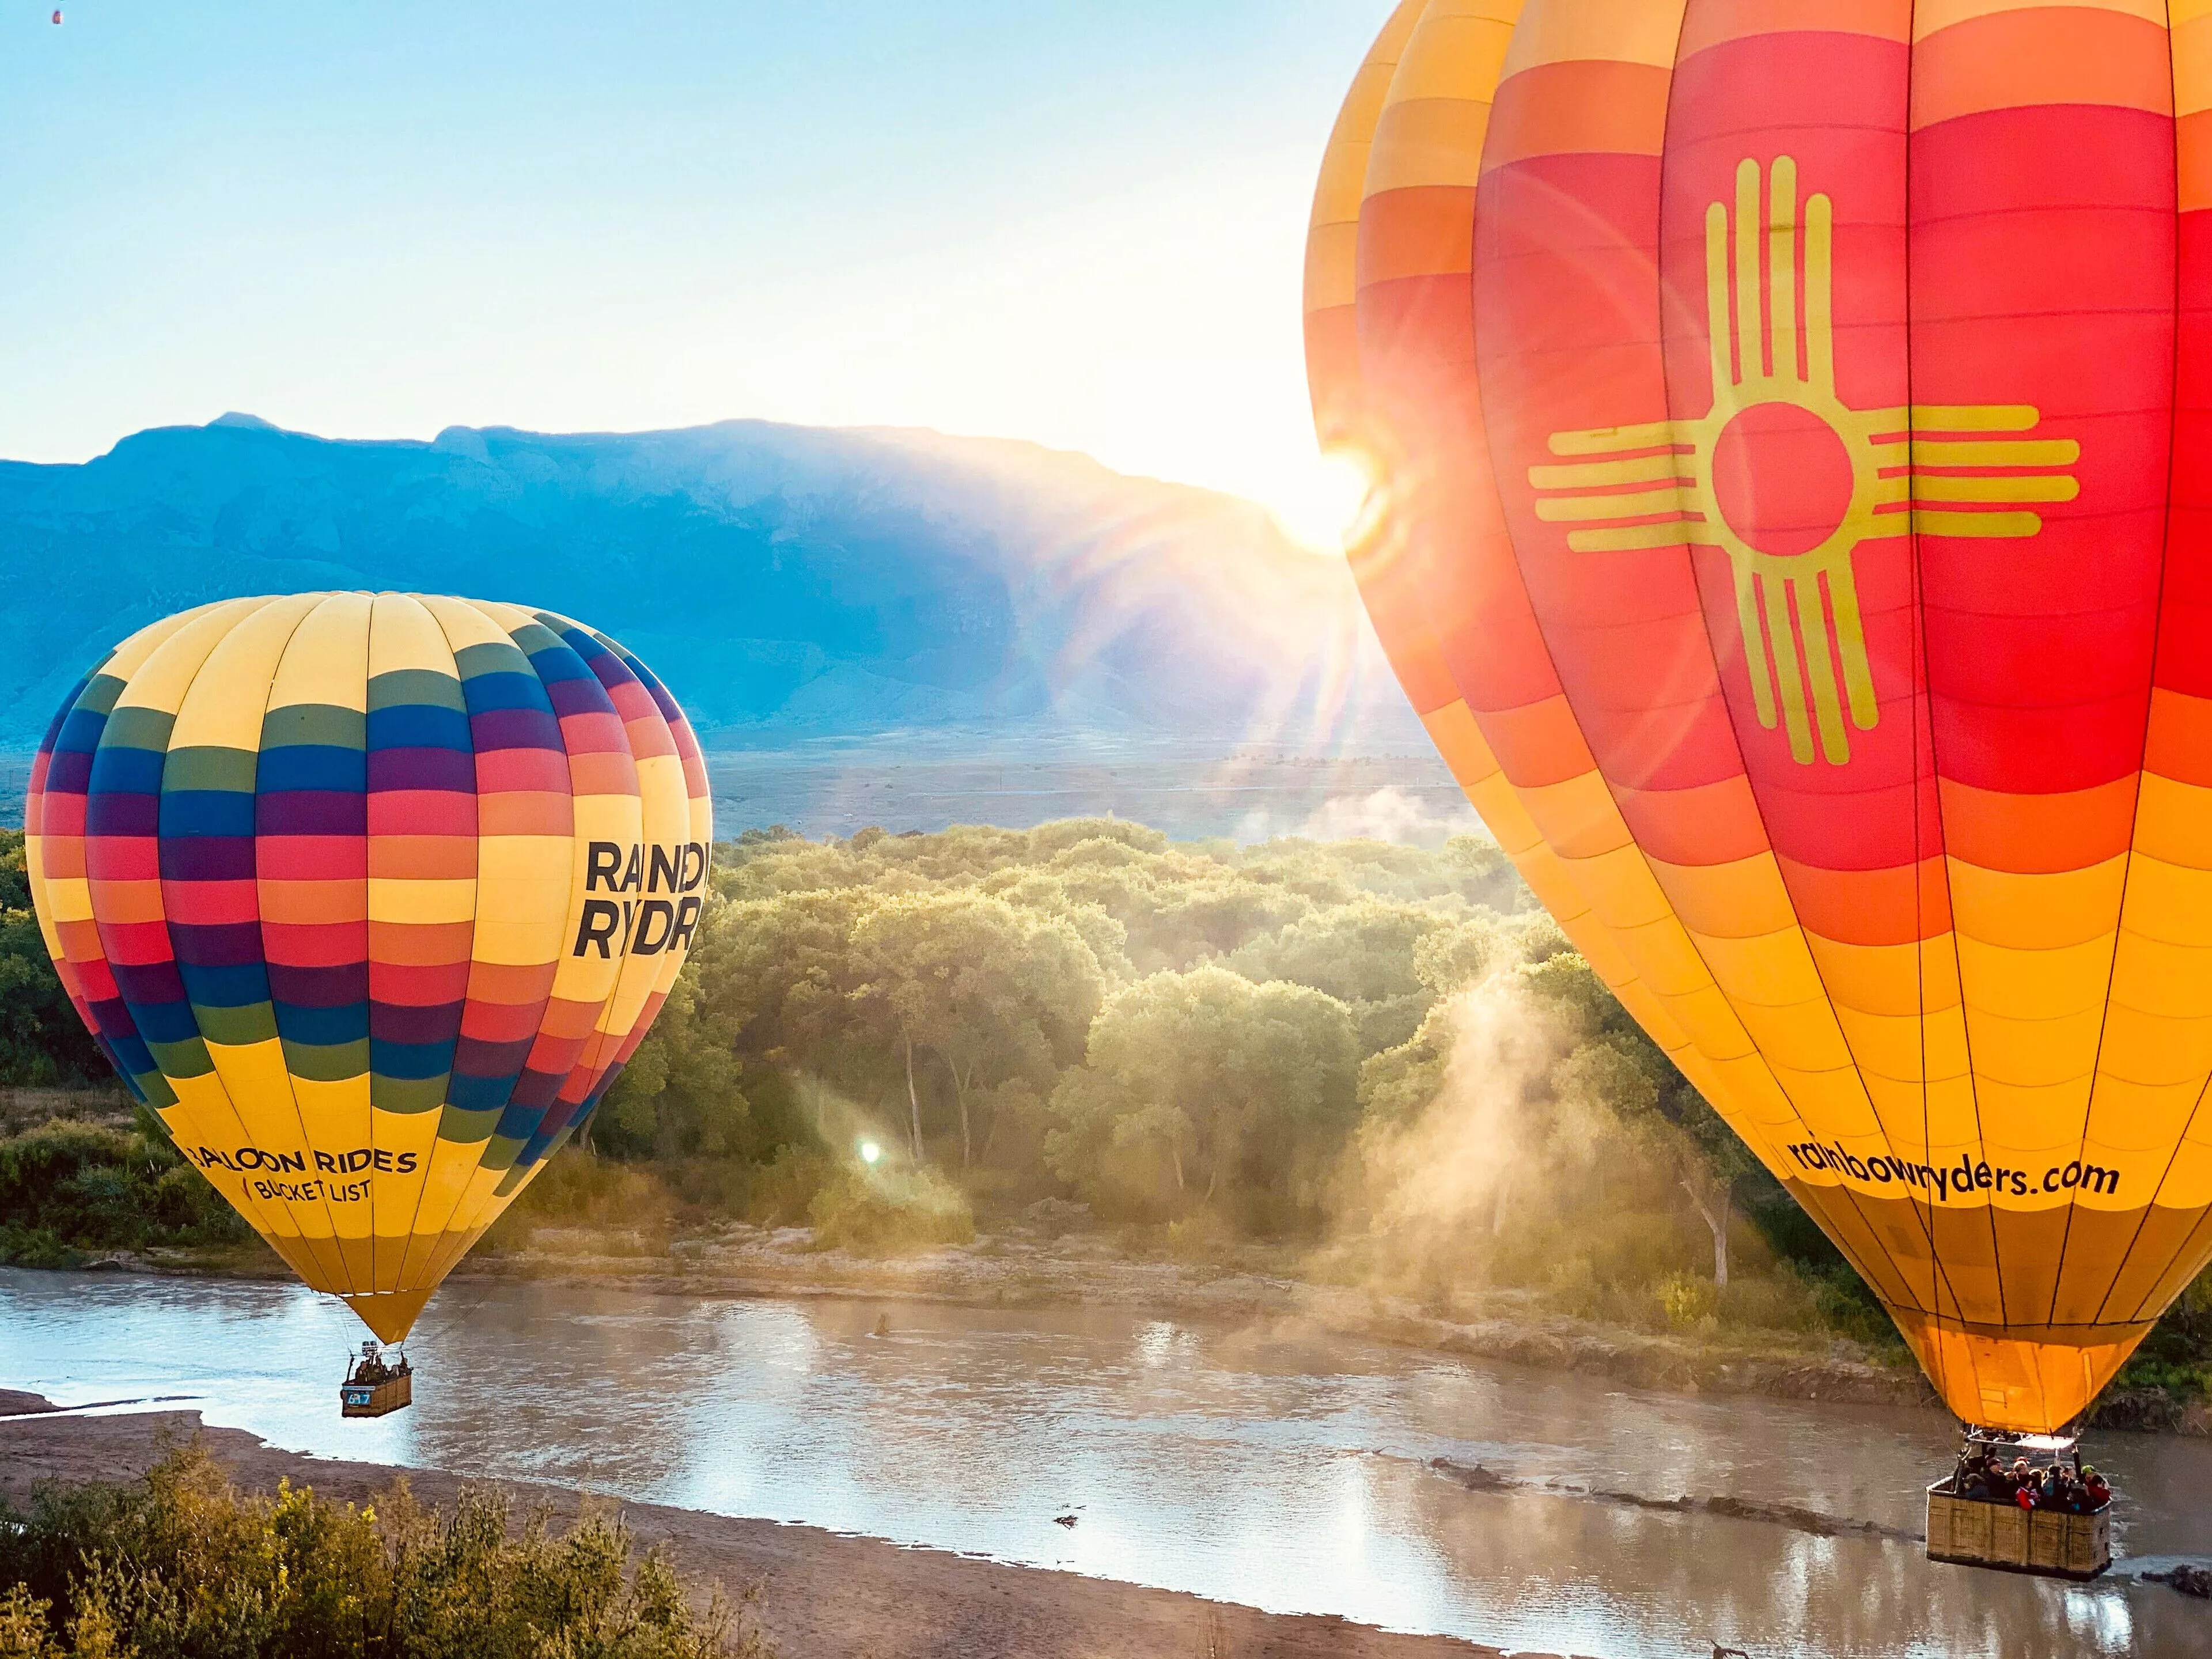 Sunrise Balloons in New Zealand, Australia and Oceania | Hot Air Ballooning - Rated 1.2